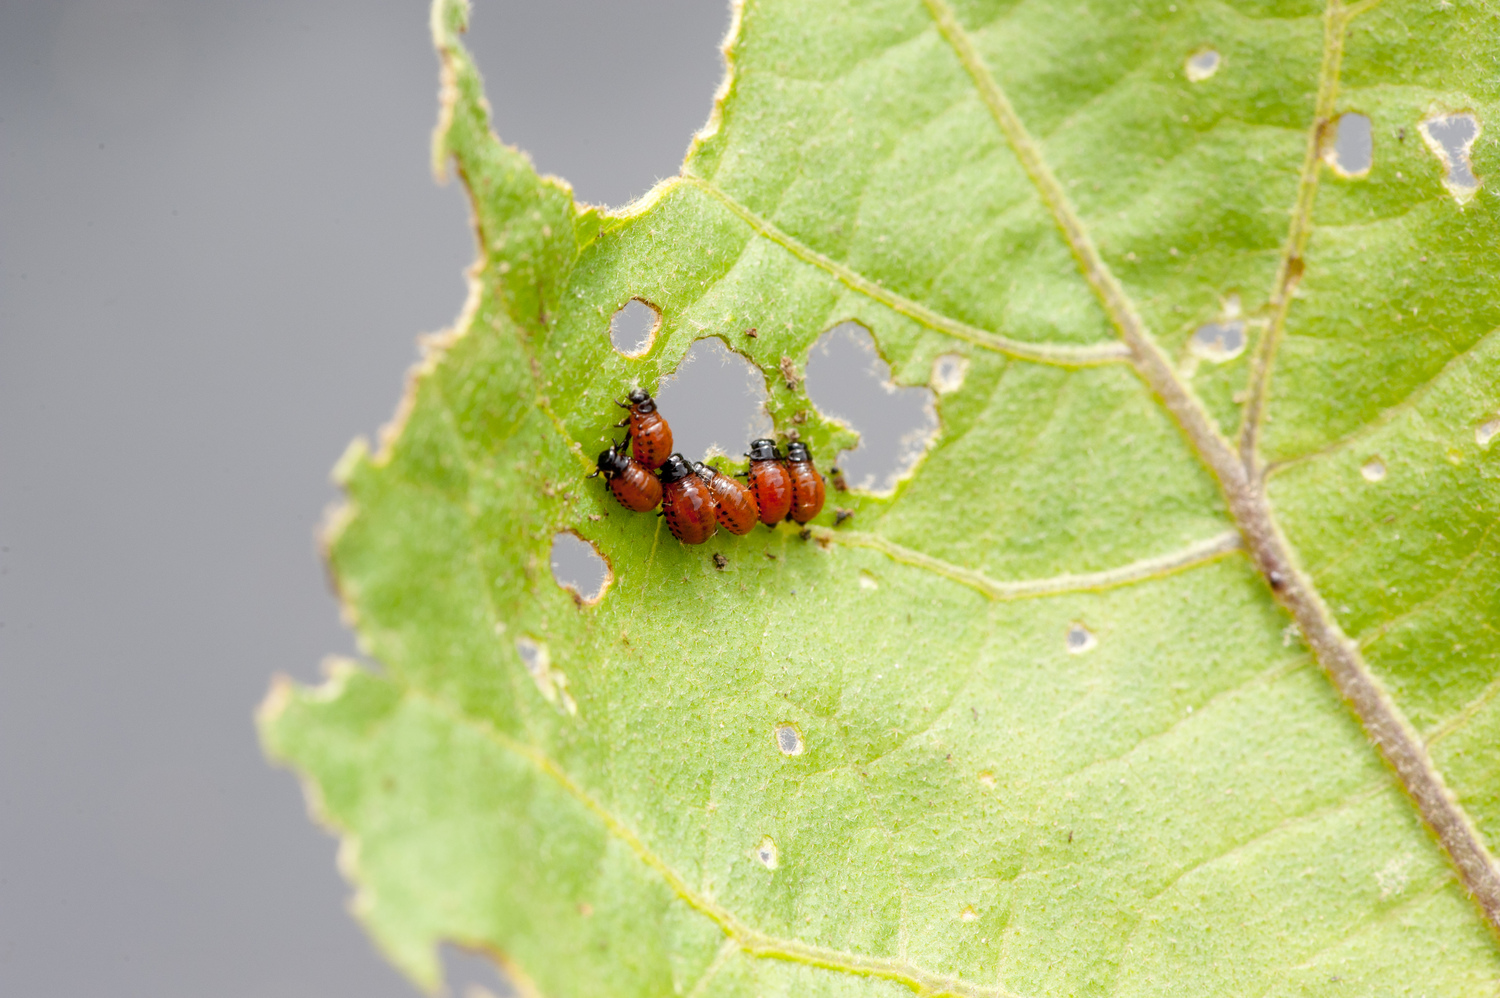 Colorado potato beetle larvae feeding on eggplant foliage. The larvae and adults leave large feeding holes on leaf interior and on leaf edges.  They can be hand-picked or organic insecticides can be used.      DWIGHT SIPLER, <a href=